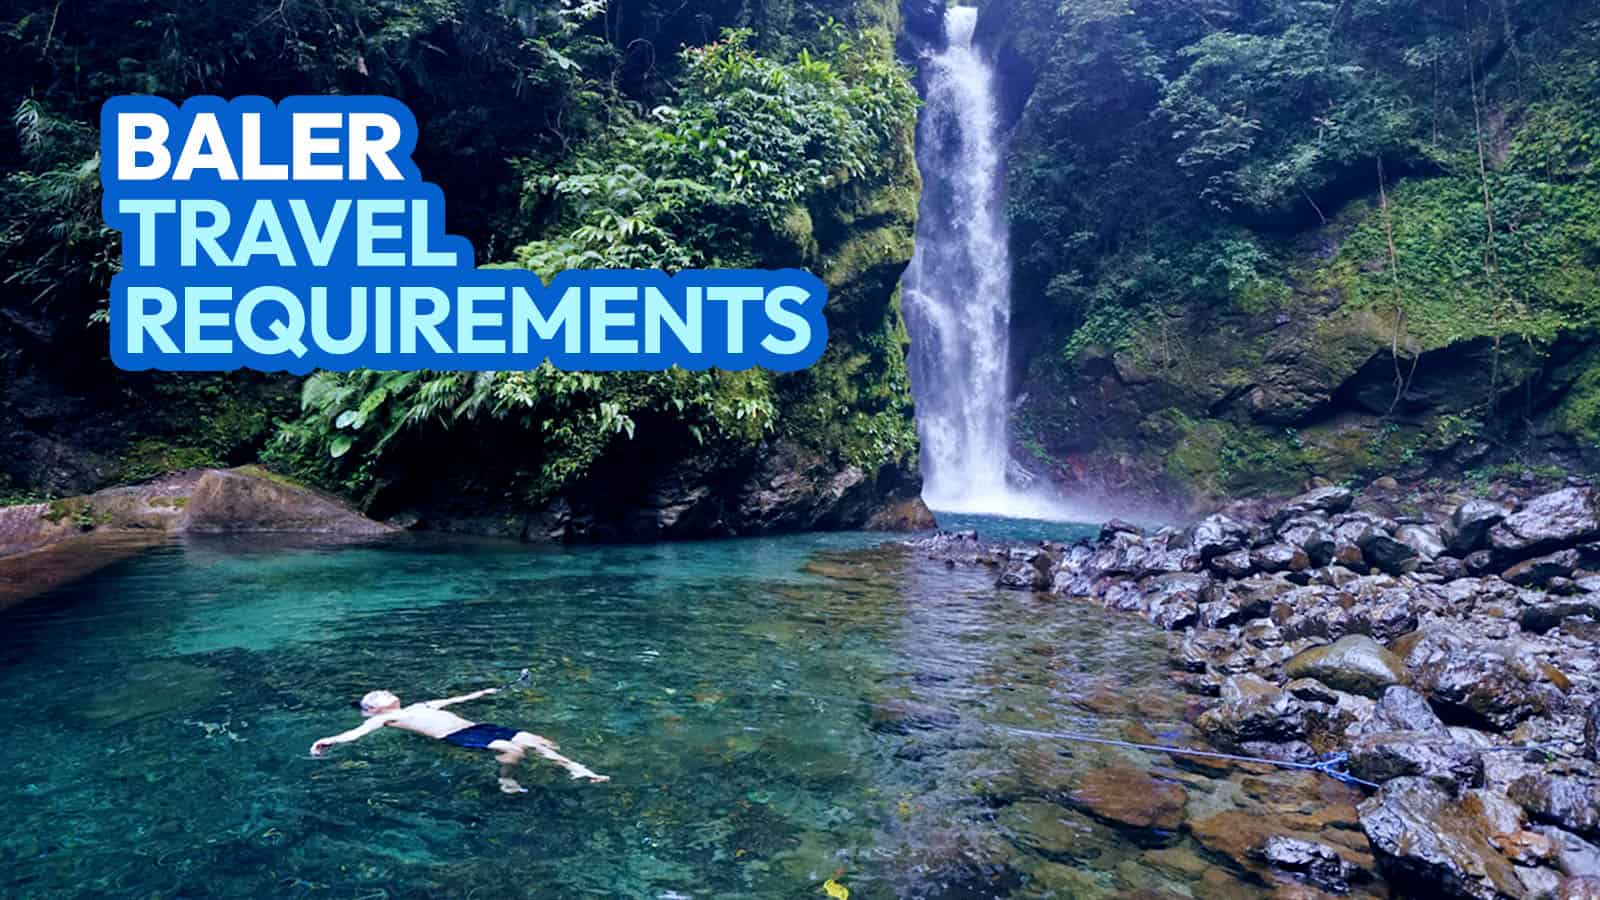 BALER TRAVEL REQUIREMENTS + List of Accredited Beach Resorts & Hotels